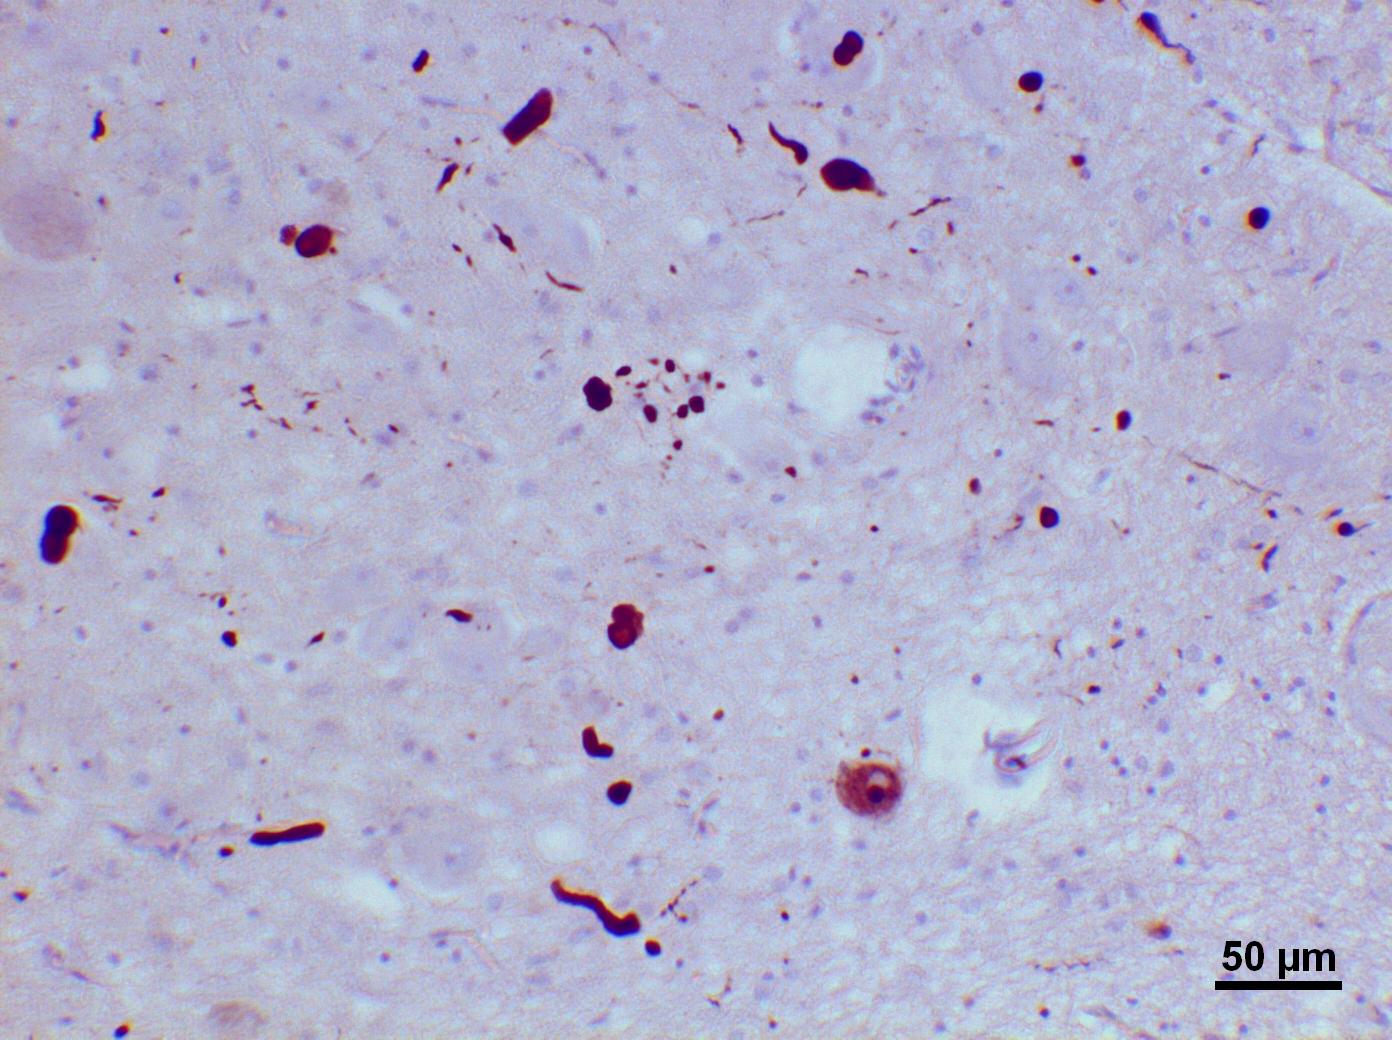 Lewy_bodies_(alpha_synuclein_inclusions)_3.jpg